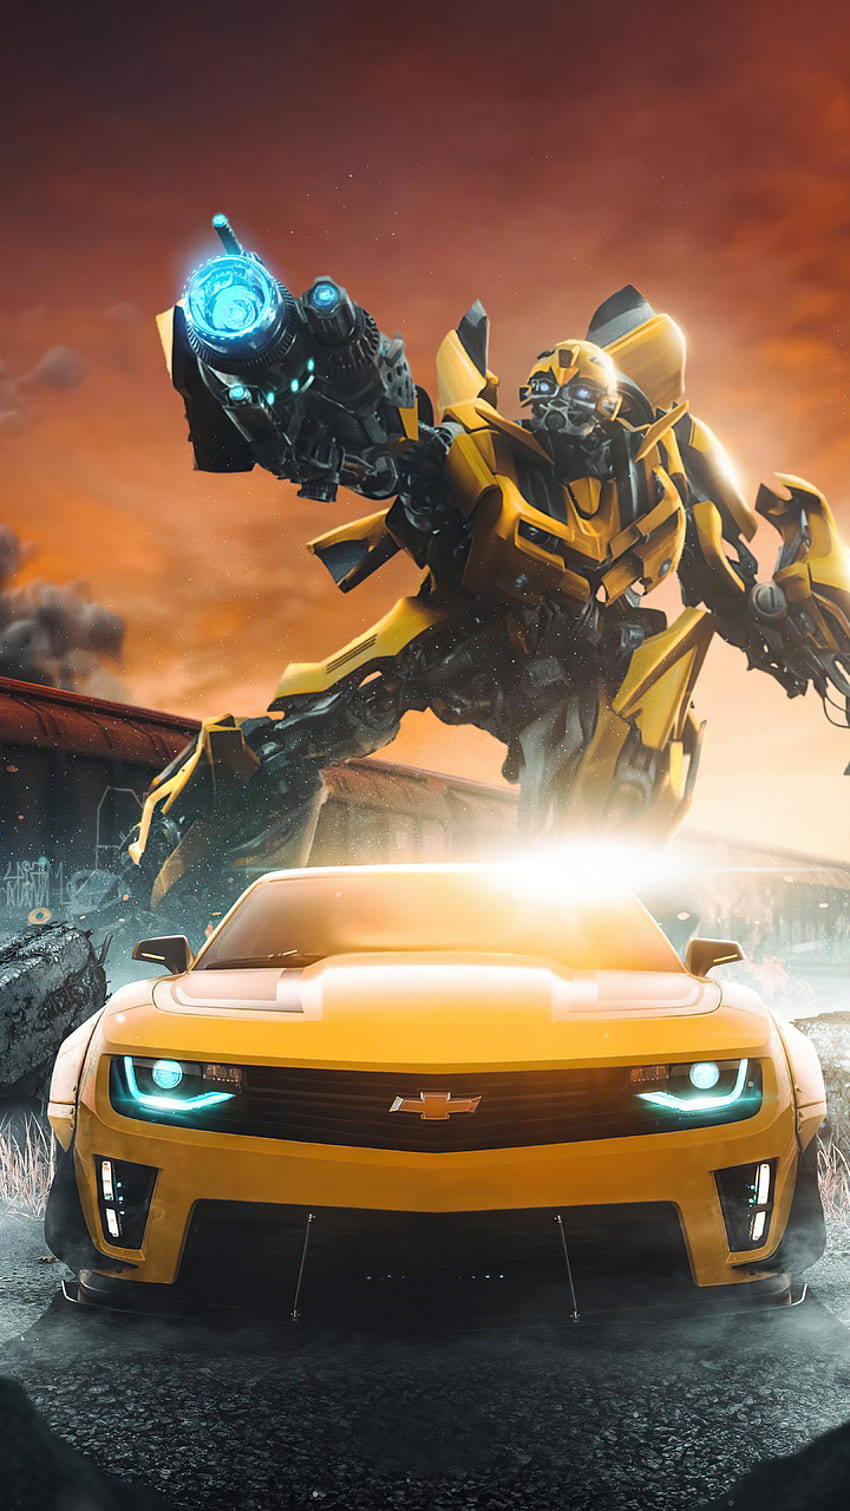 2932x2932 Transformers The Last Knight Bumblebee Megatron Optimus Prime 4k  5k Ipad Pro Retina Display HD 4k Wallpapers, Images, Backgrounds, Photos  and Pictures